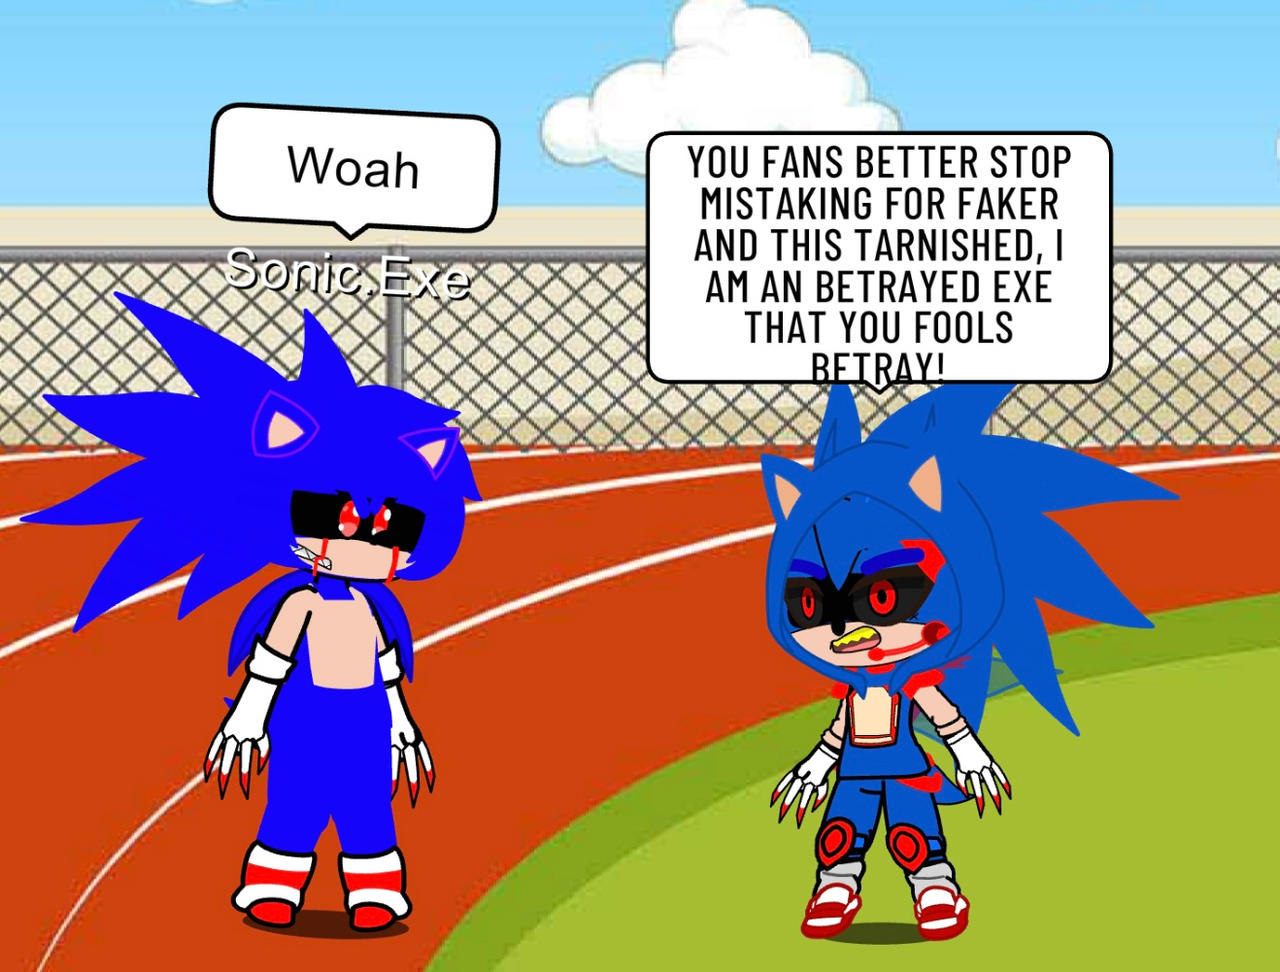 Hey Sonic fans,what do you guys think about faker Sonic from the